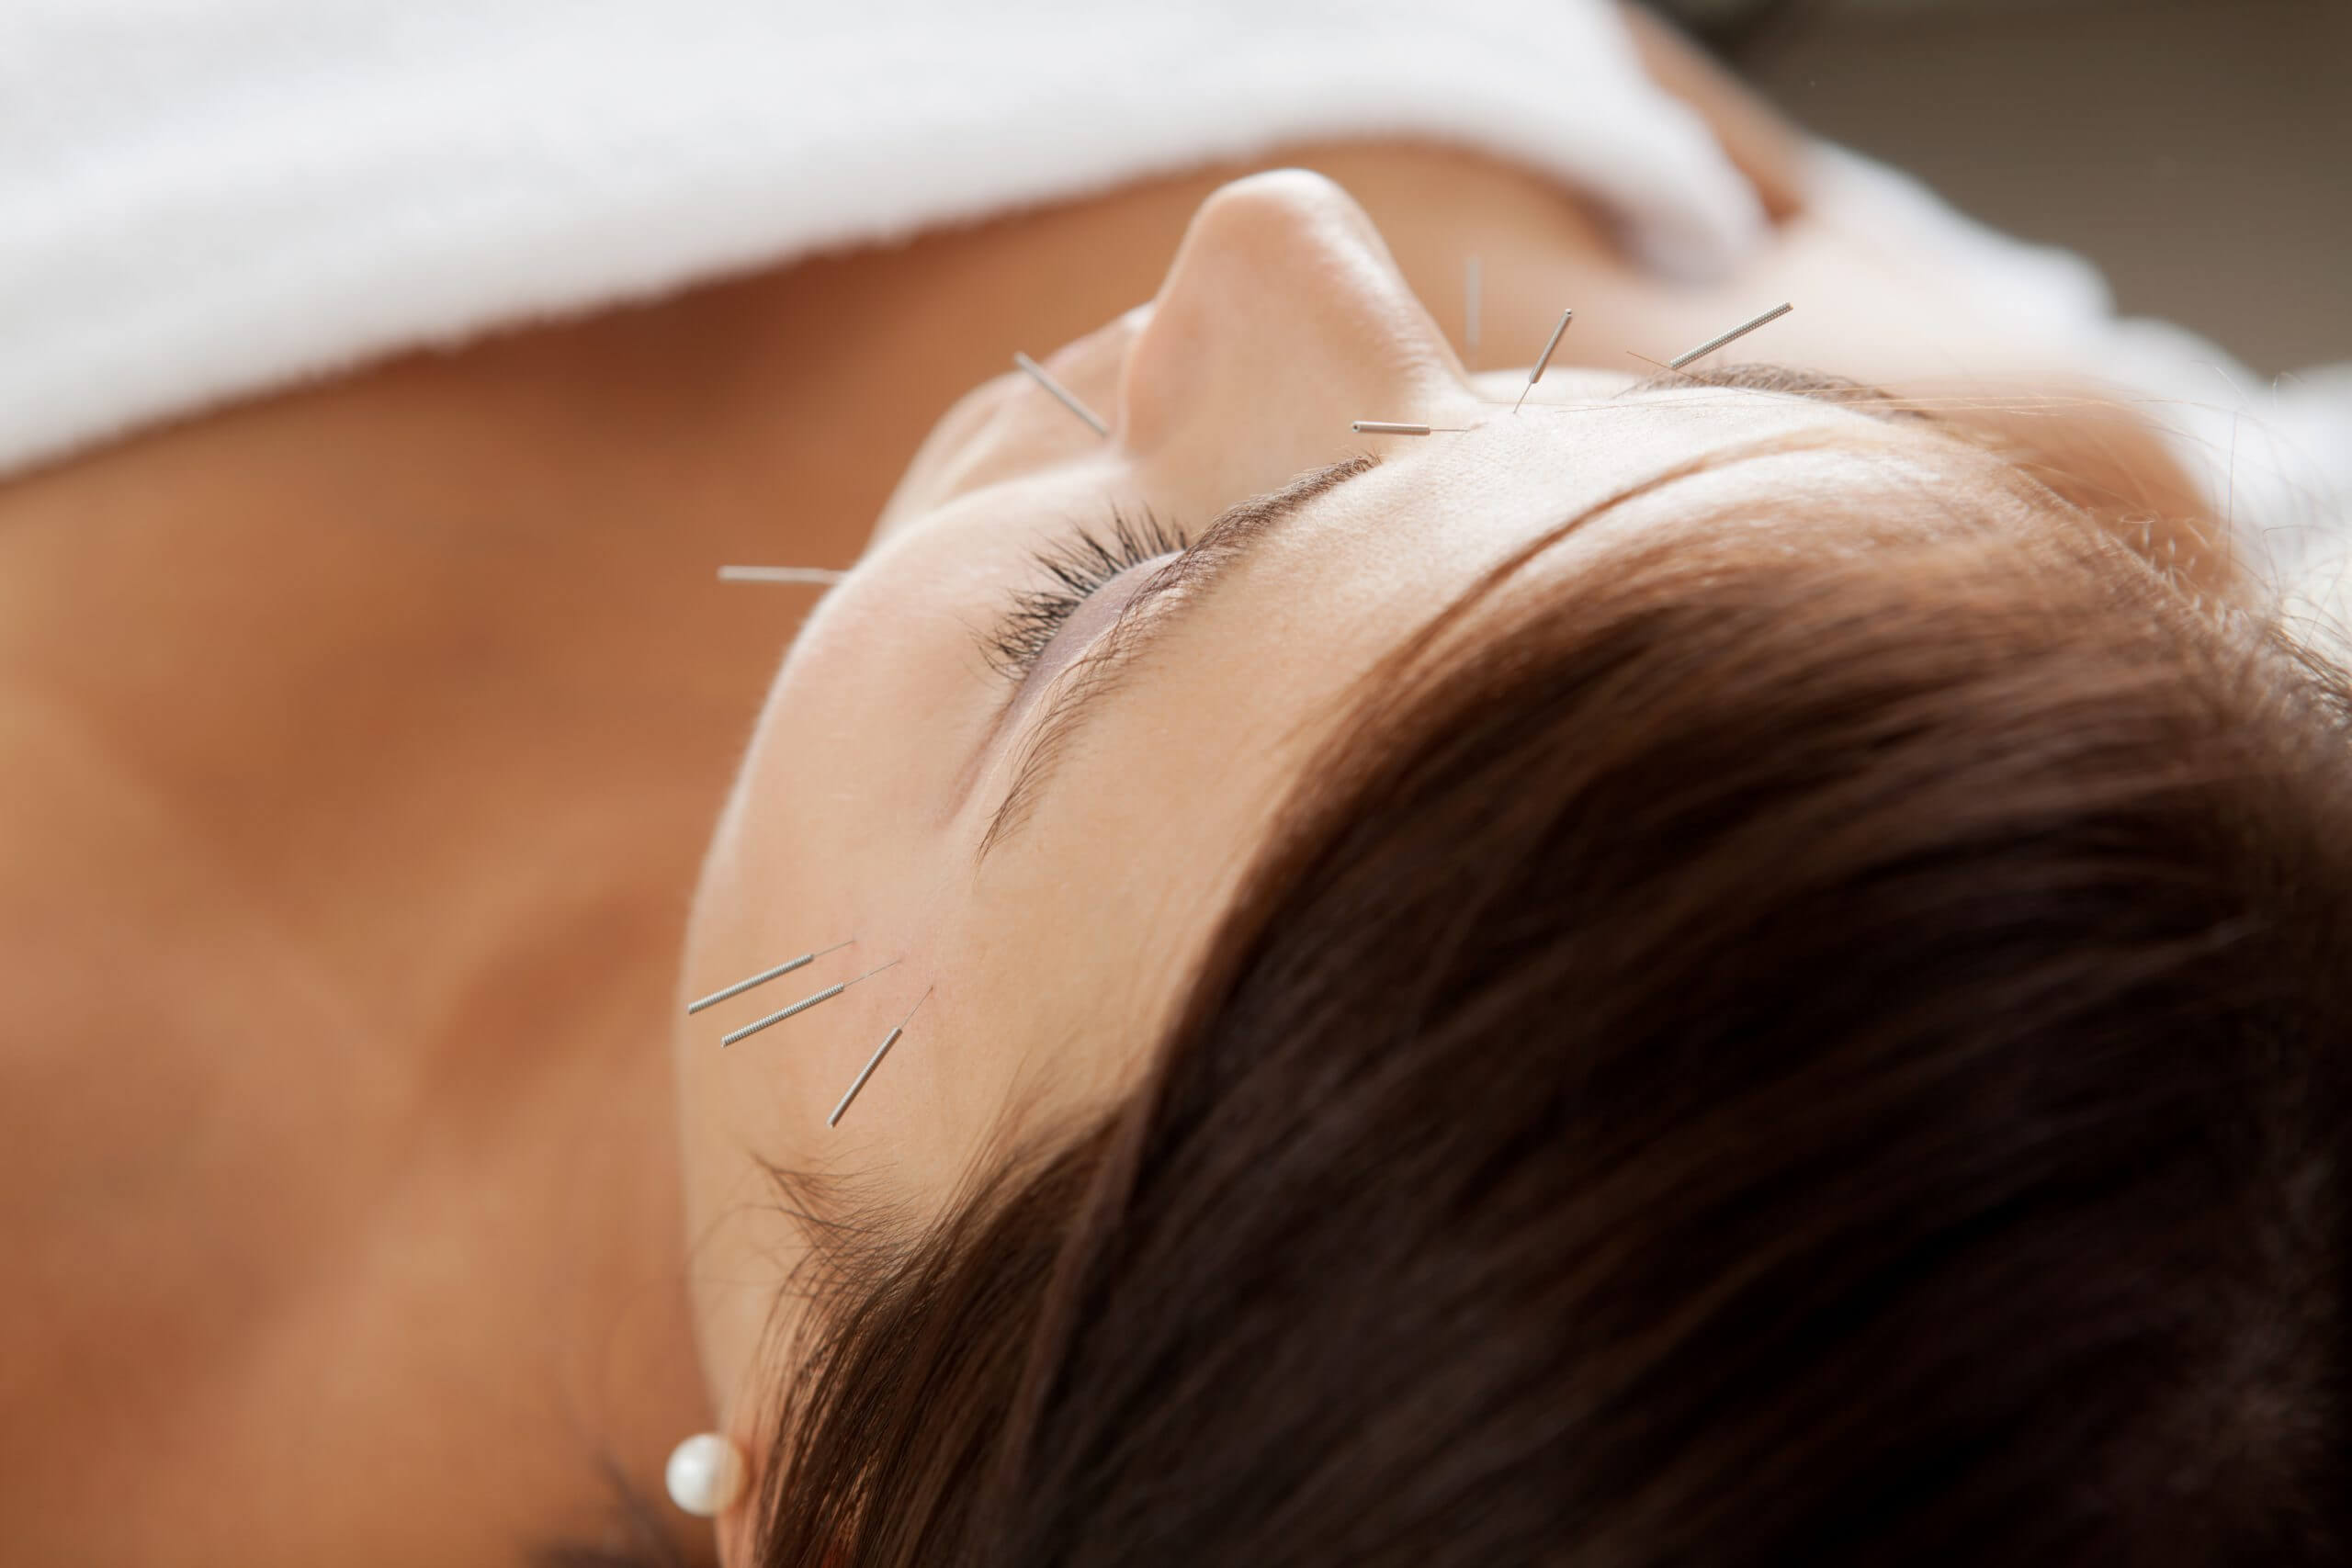 Better than botox - Cosmetic Acupuncture Procedure